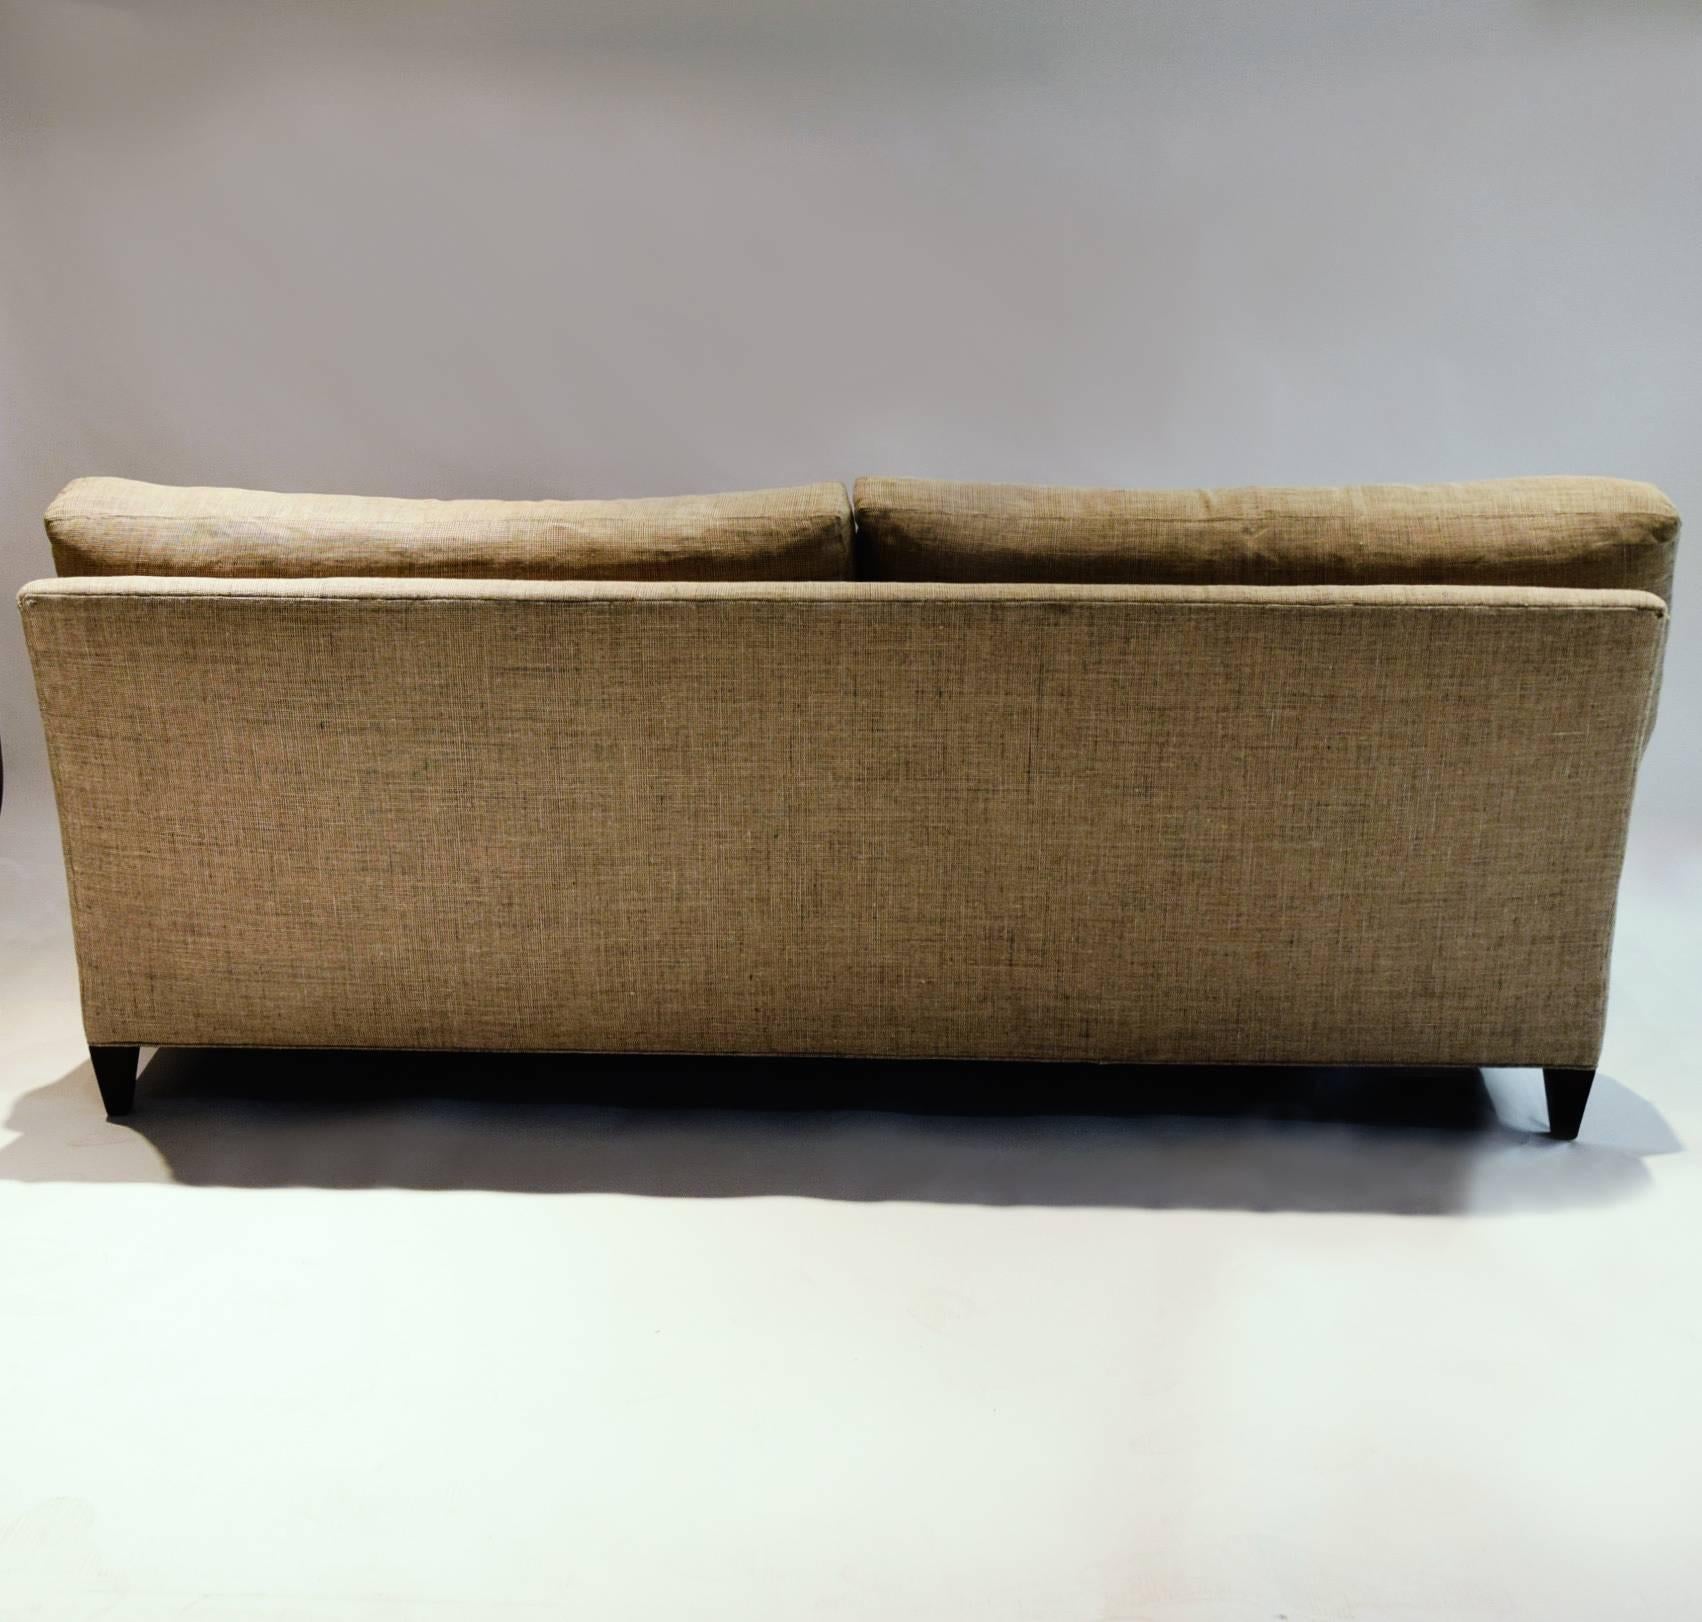 Three-Seater Sofa Upholstered in Linen, Designed by Suzanne Kasler 2006 1